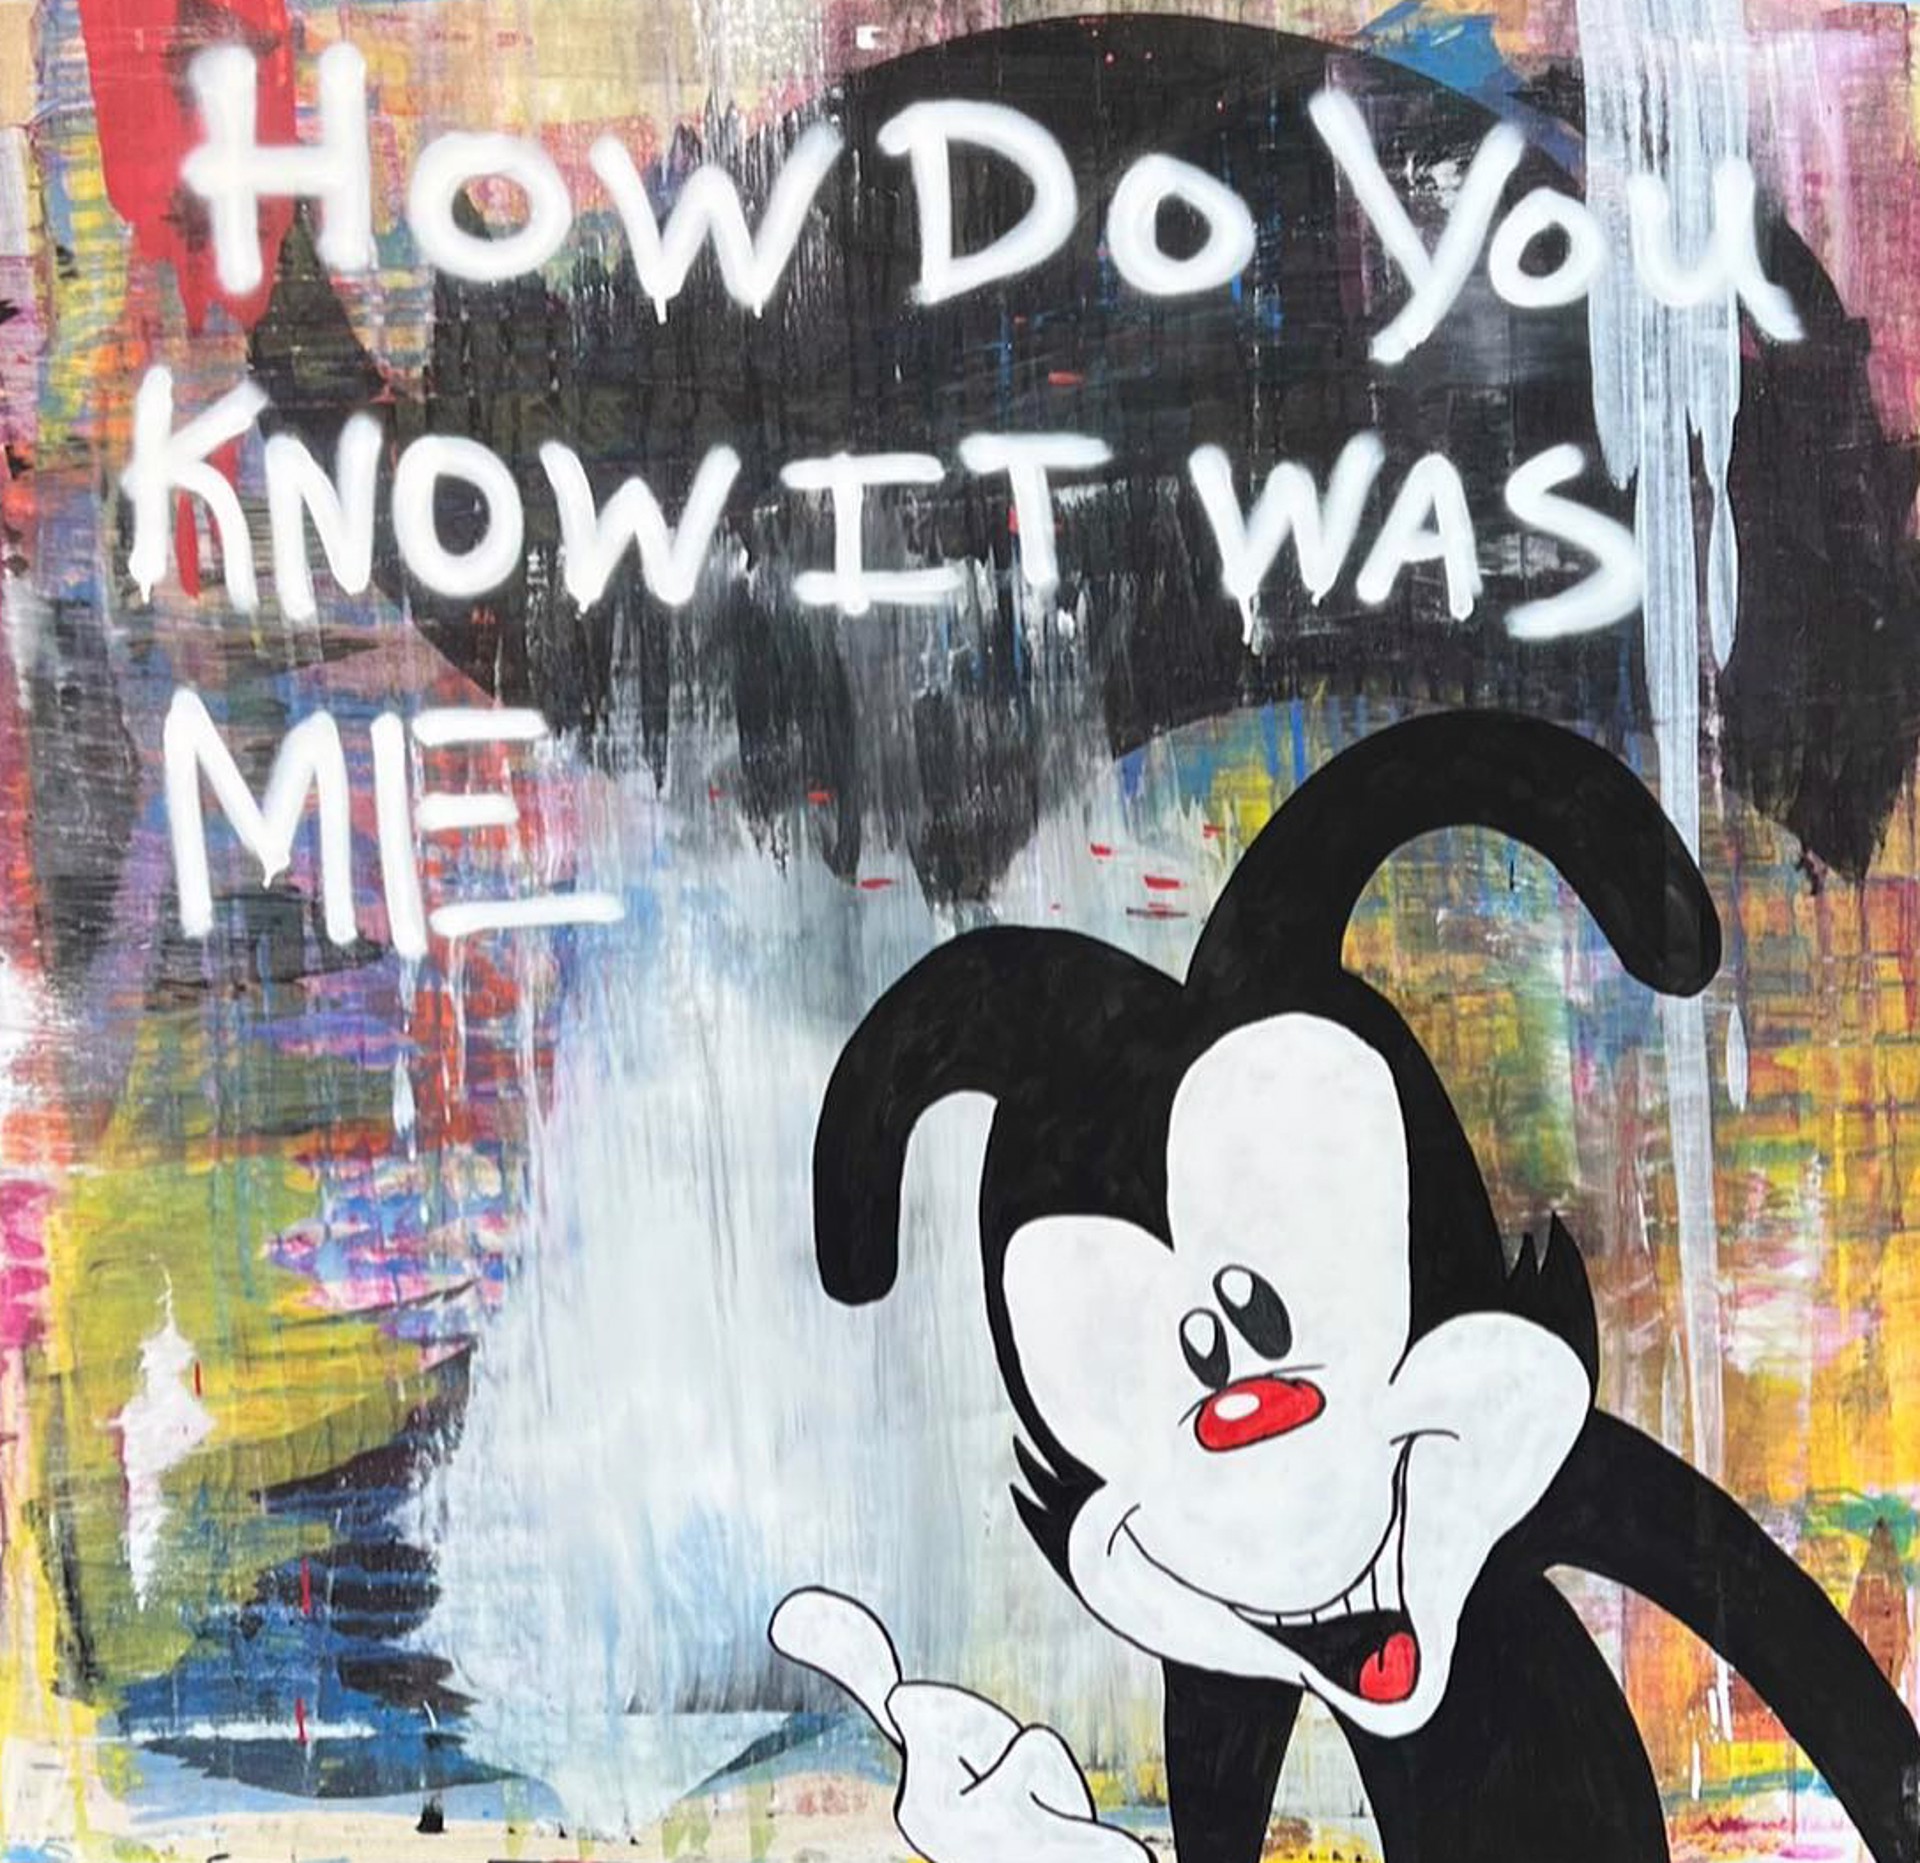 Abstract Chaos ( Animaniacs) by Anderson Smith